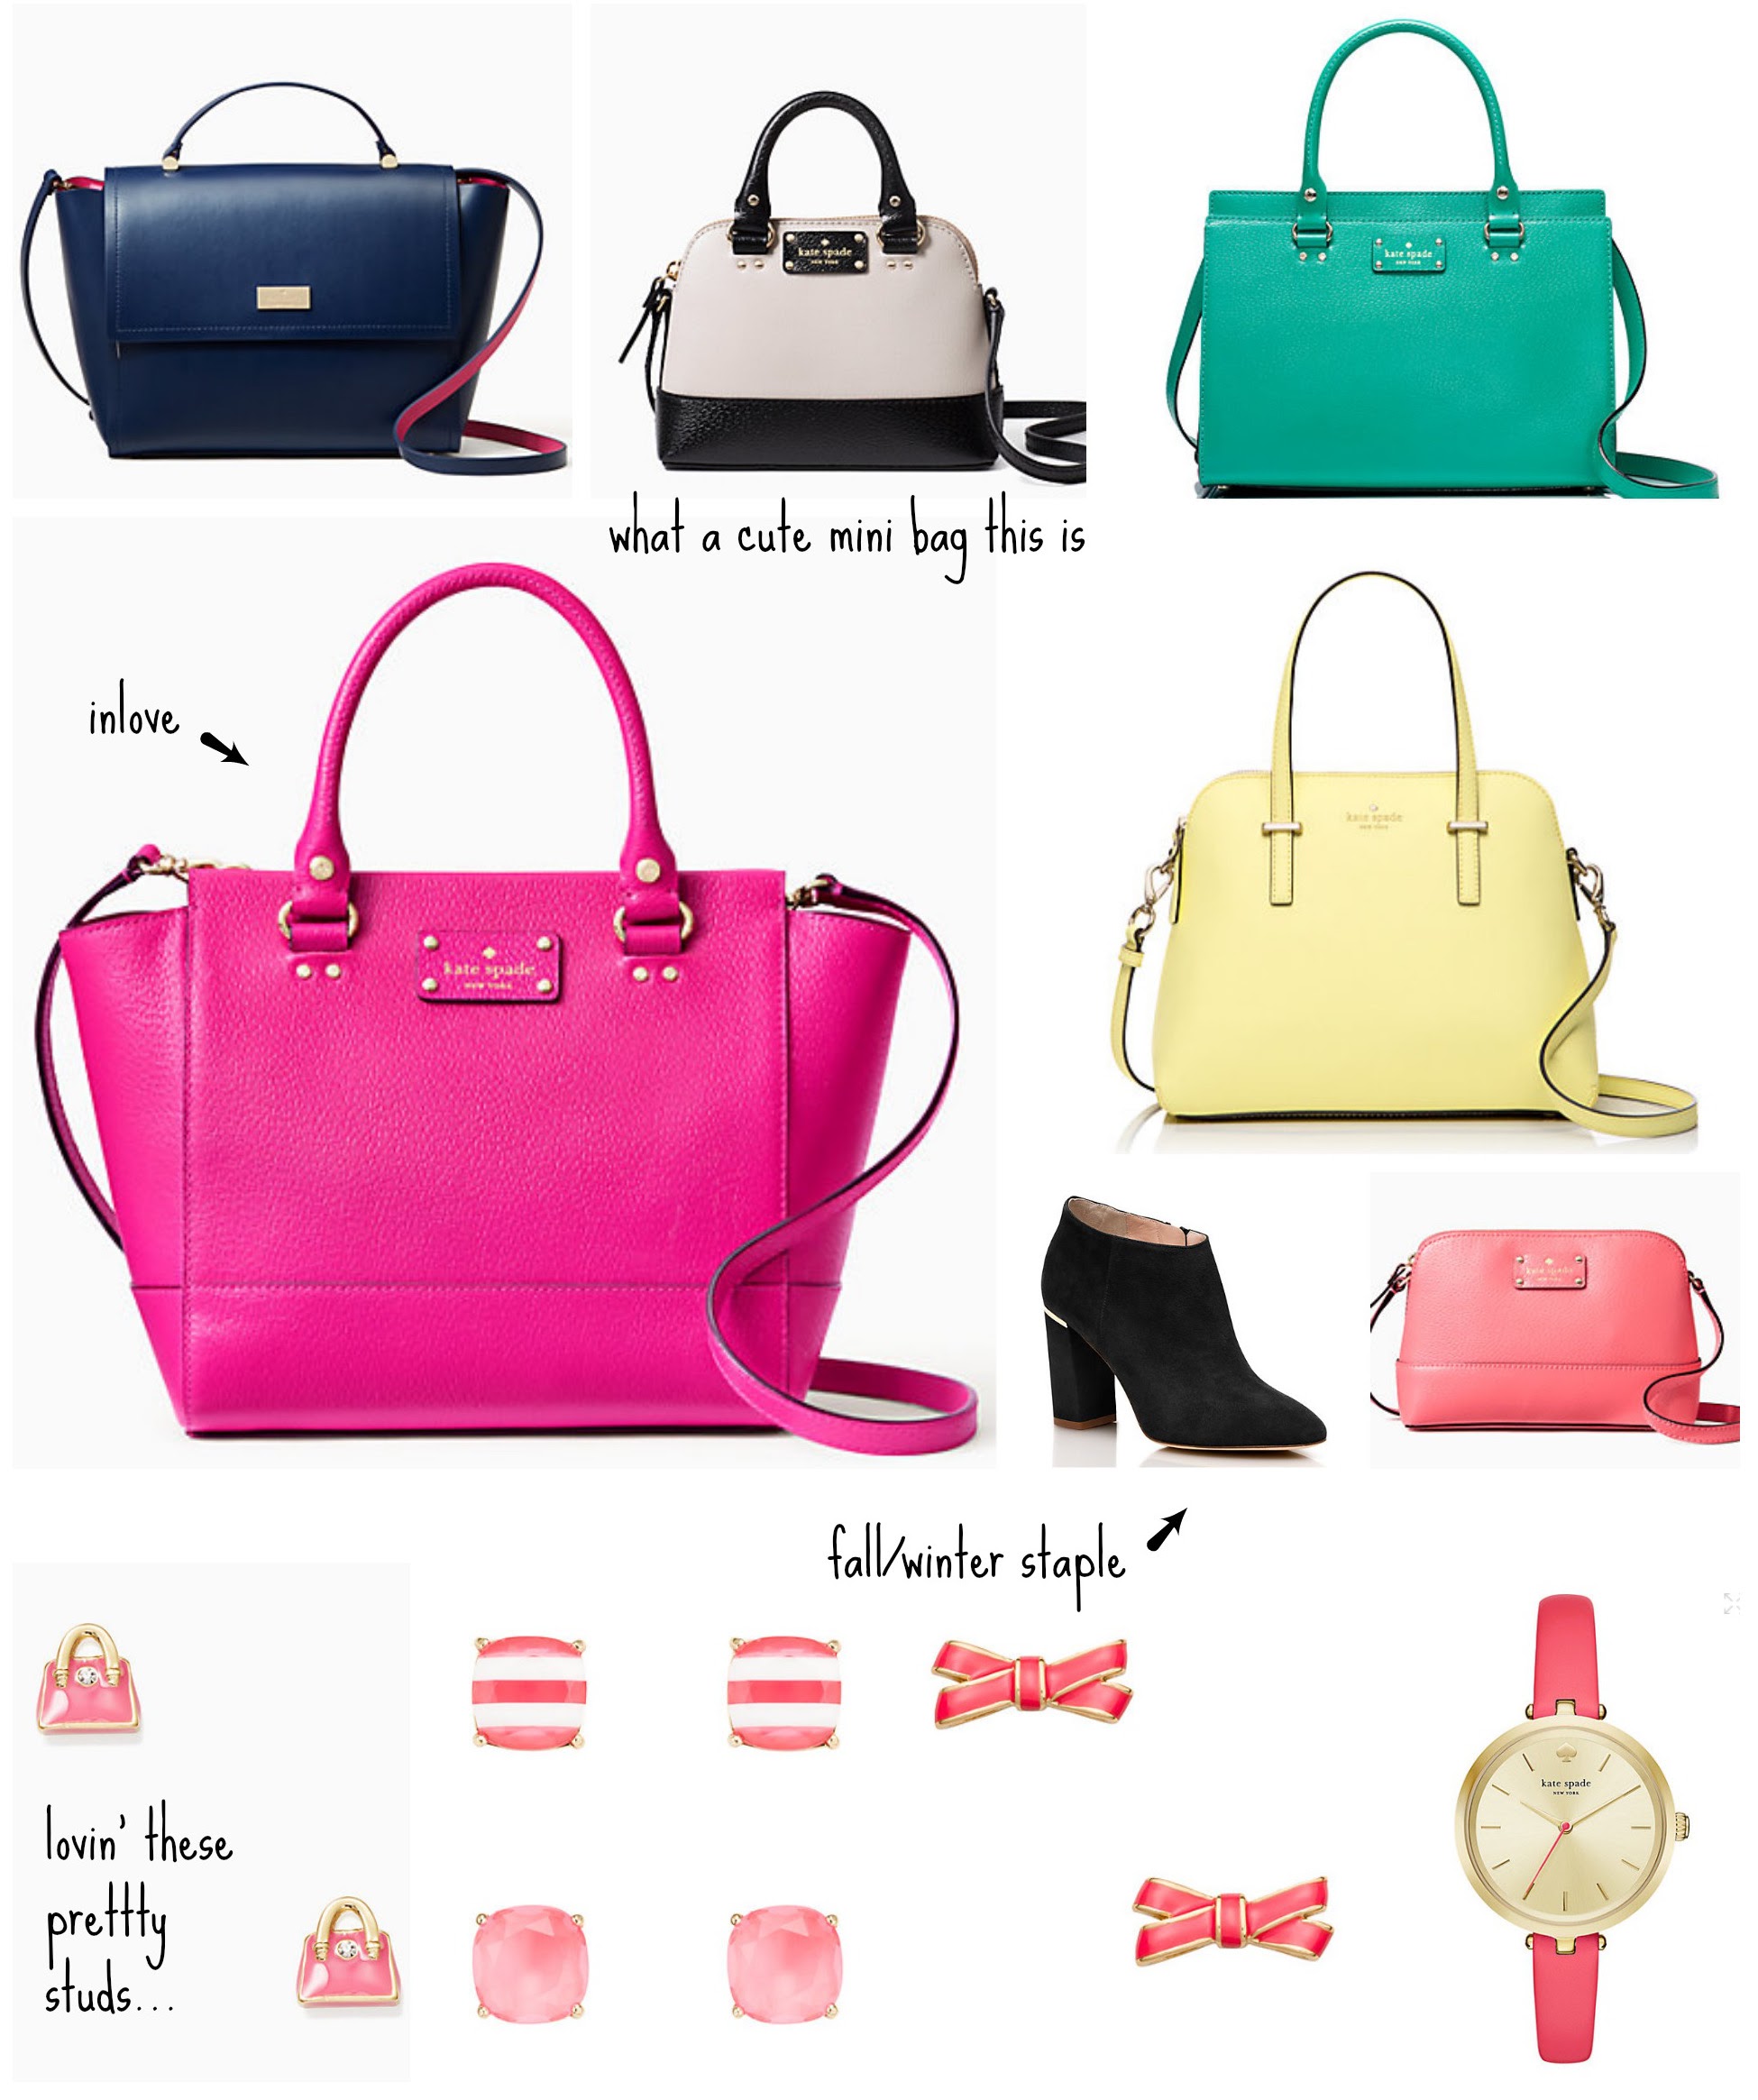 Kate Spade Surprise Sale Roundup (Up to 75% off; 2 Days Only) | A Glad Diary